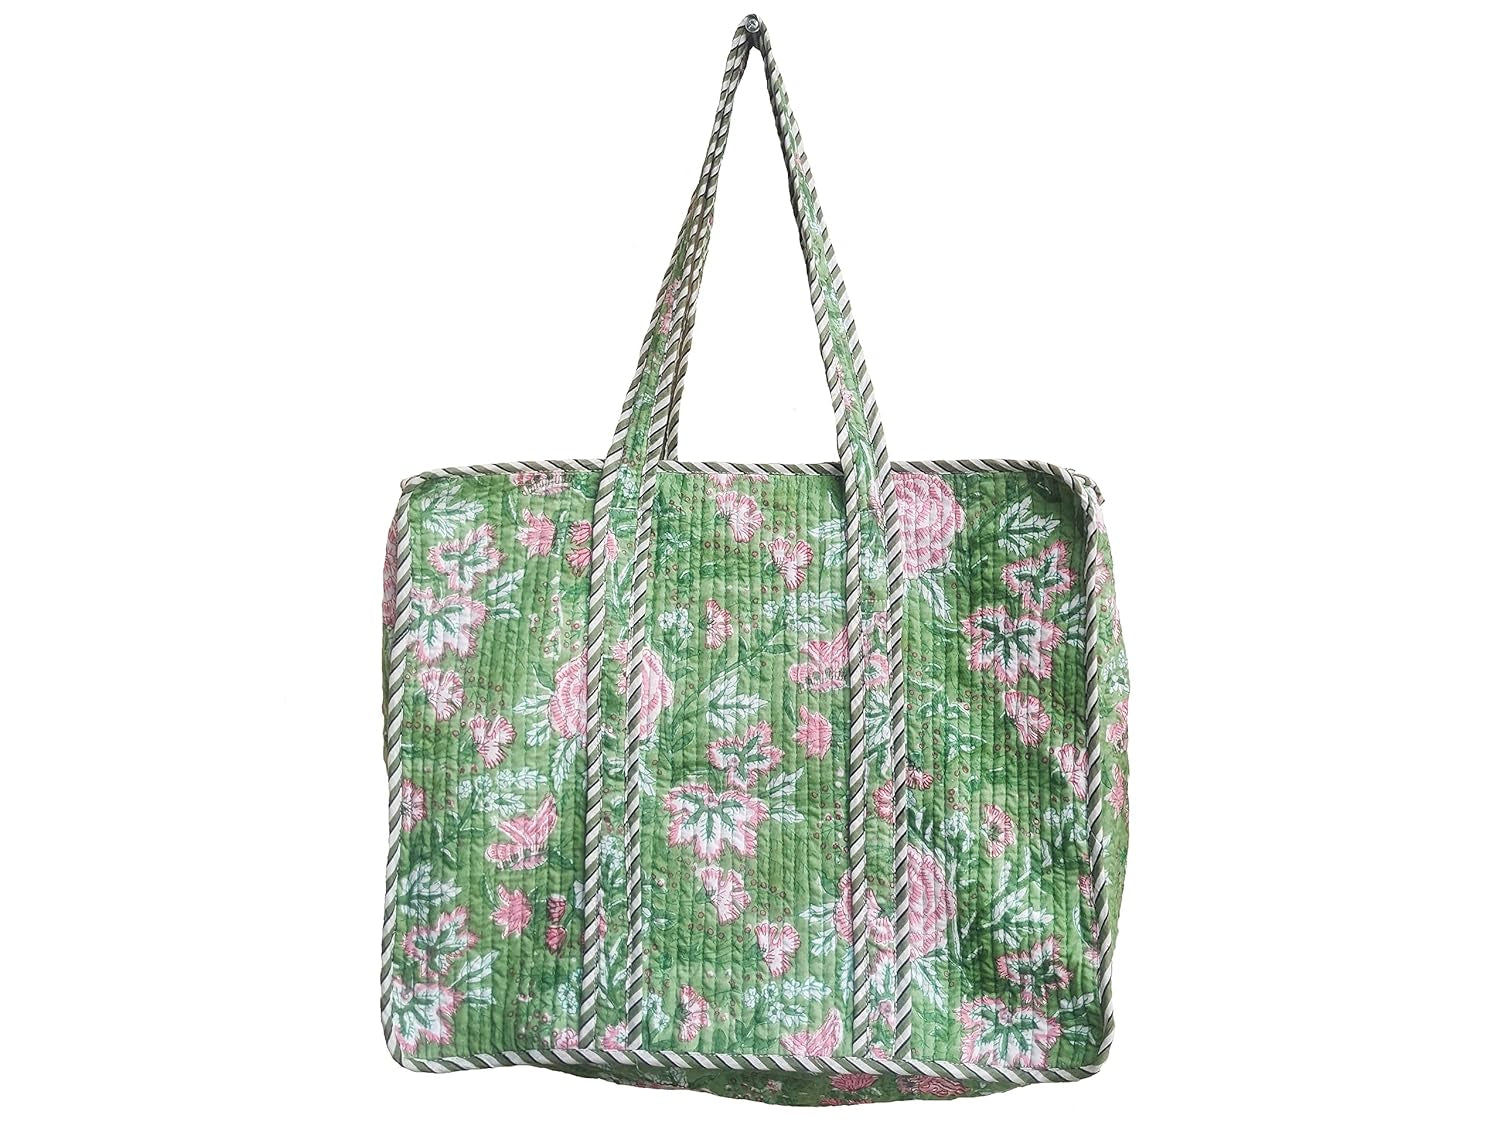 Quilted Tote Bag, Cotton Large Shopping Bag, Multicolor Floral Tote Bag, Eco Friendly Sustainable Sturdy Grocery Bag, Shopping Bag, Reversible Large Tote Bag (Green Rose)